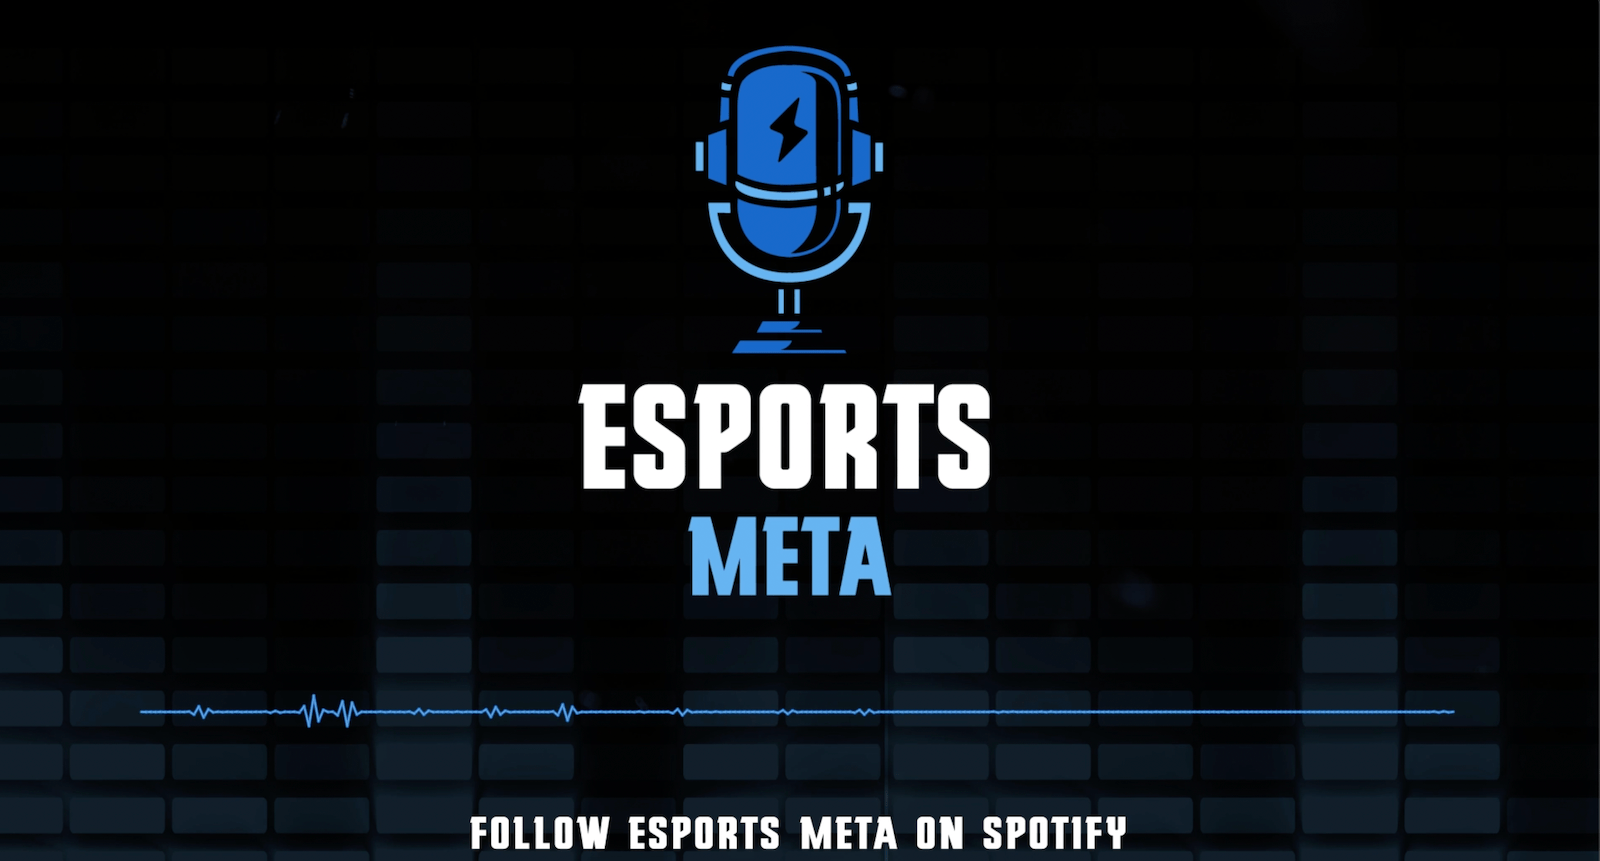 Esports Meta podcast logo which is a blue microphone with Nerd Street logo